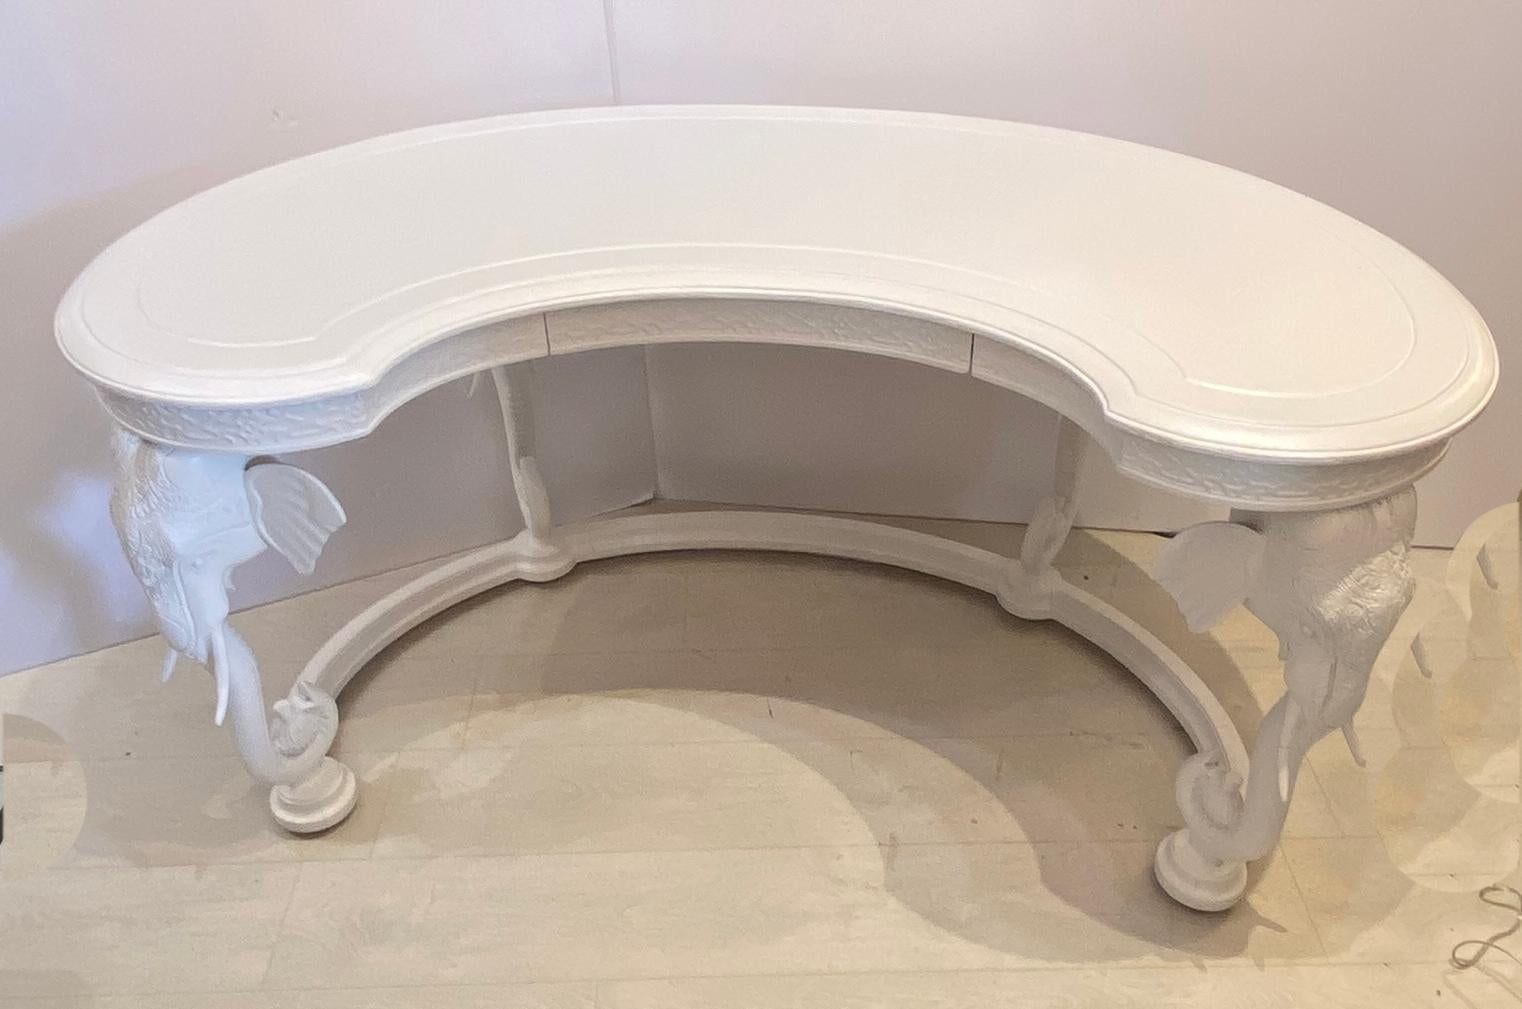 Gampel and Stoll Elephant Desk In Good Condition For Sale In West Palm Beach, FL